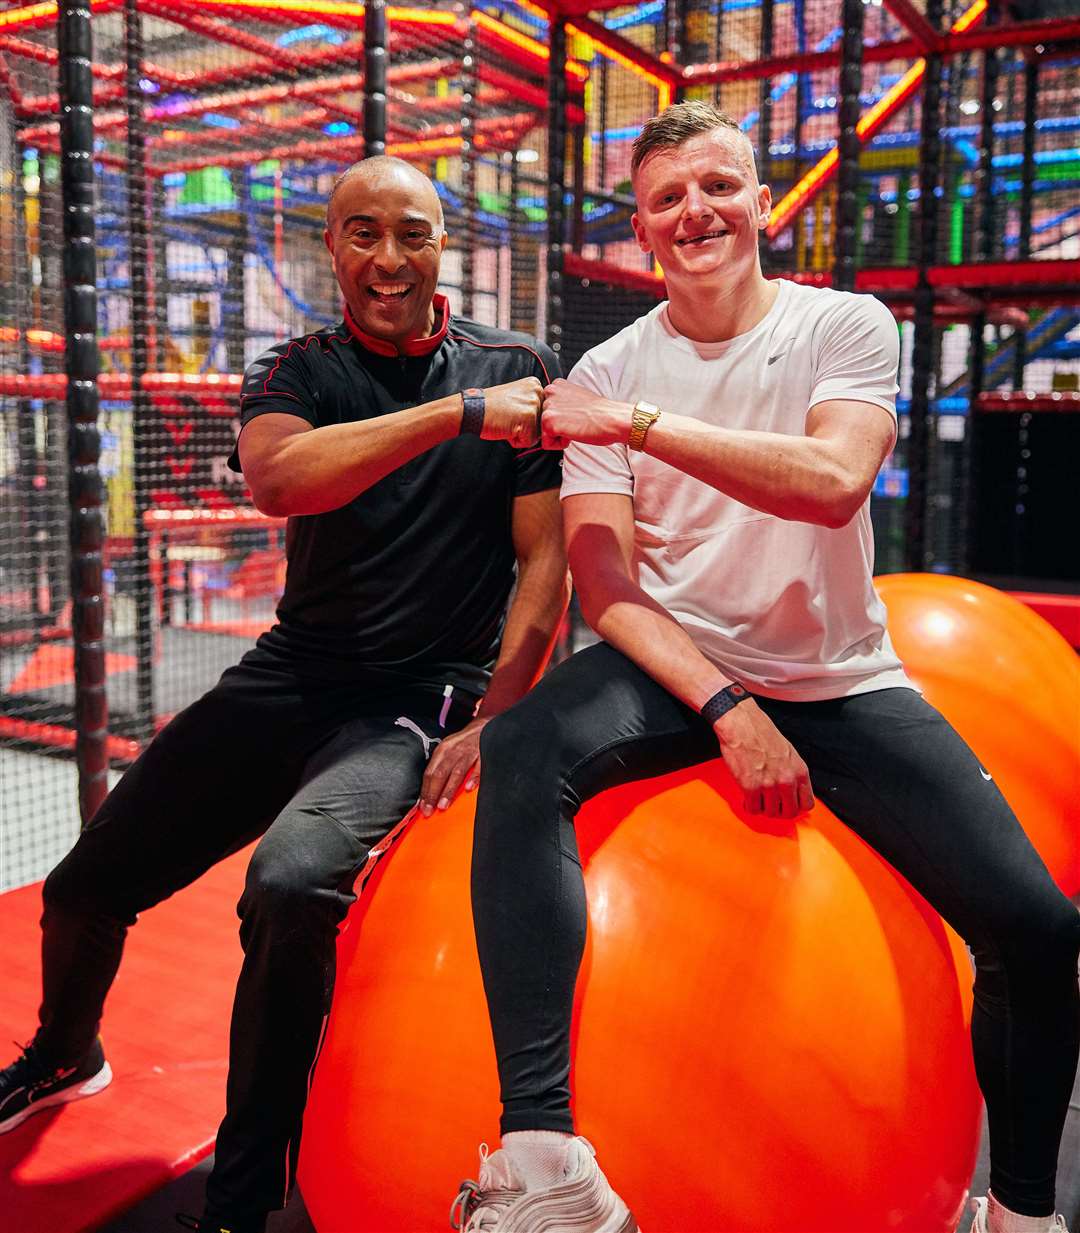 Olympic medallist Colin Jackson and Britain's Got Talent star and football freestyler Jamie Knight attended the opening weekend